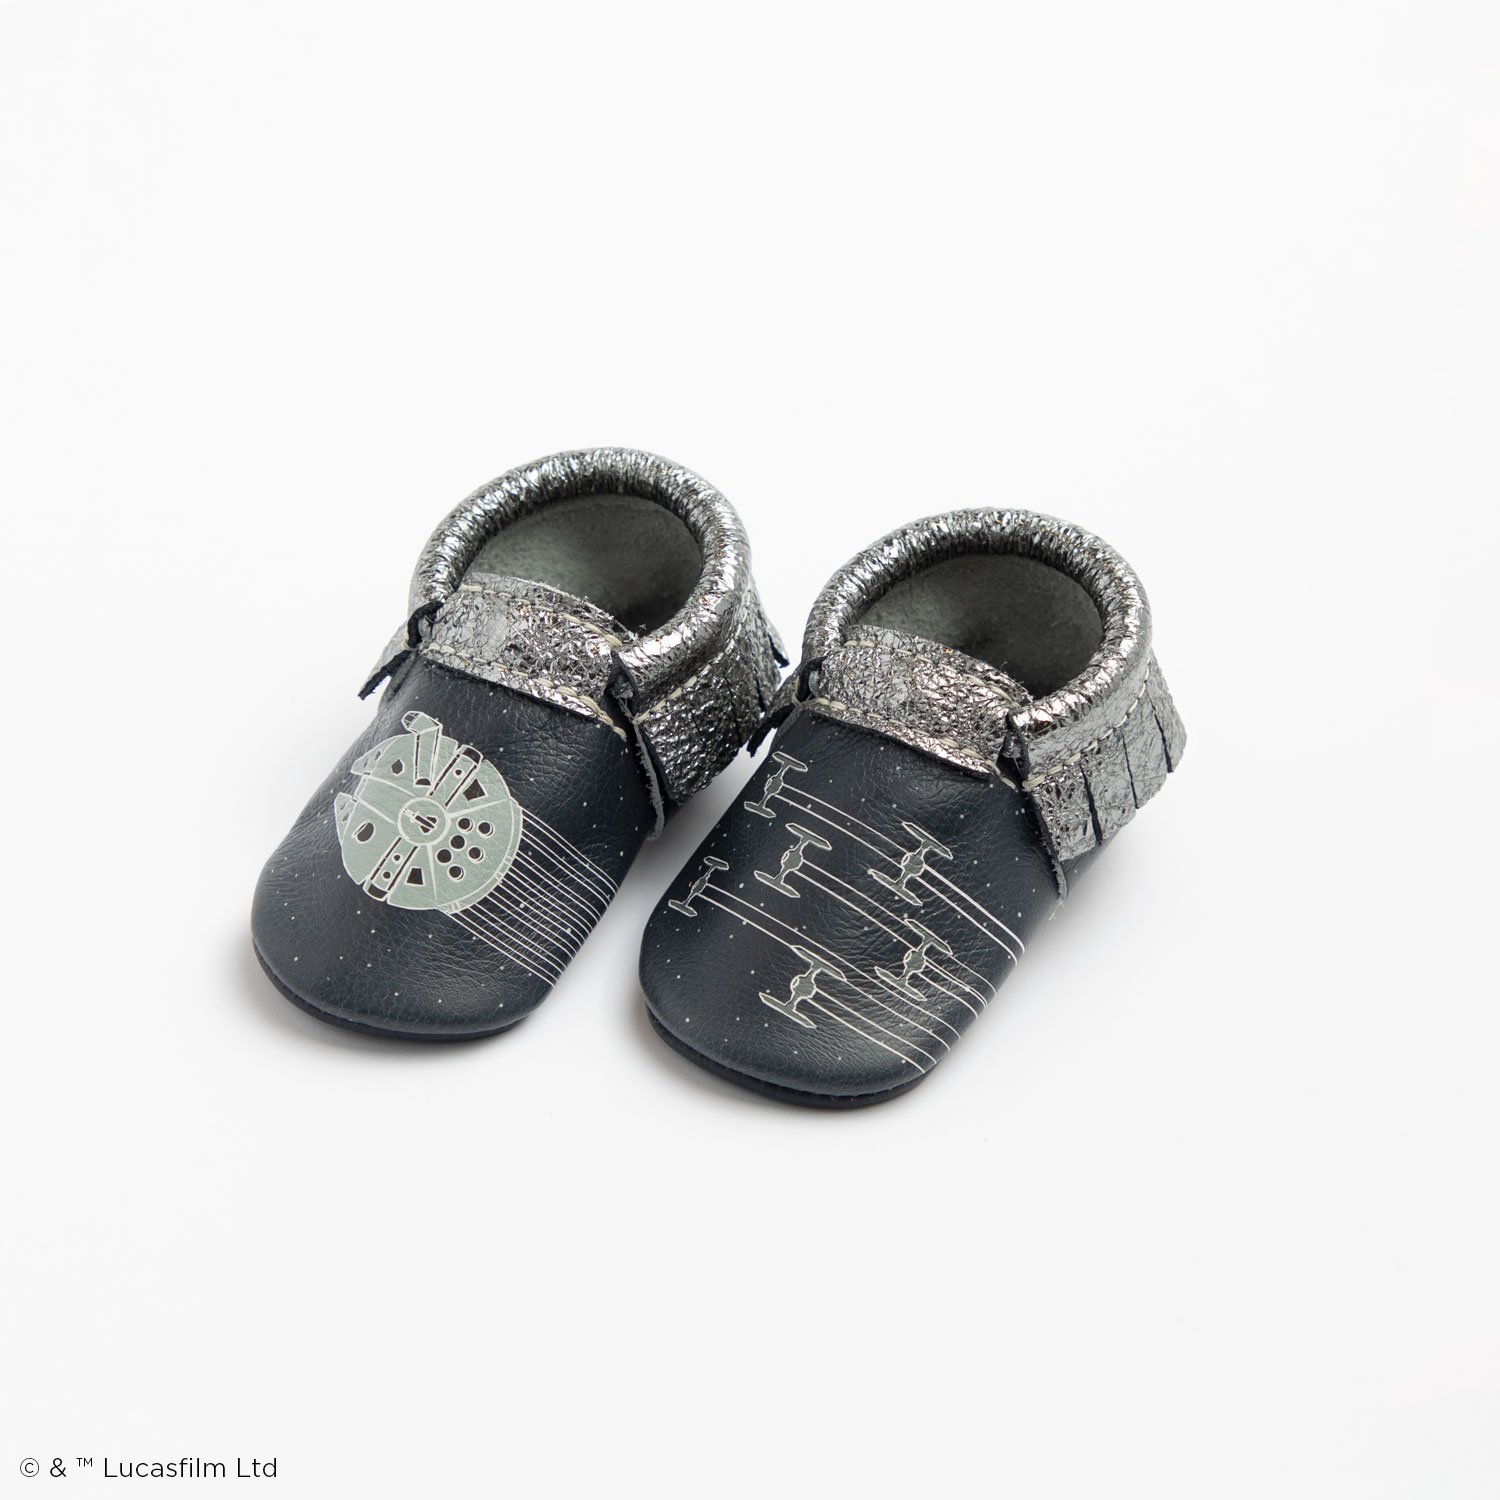 Freshly Picked Star Wars Baby Shoes Are Strong With The Force - Shoes